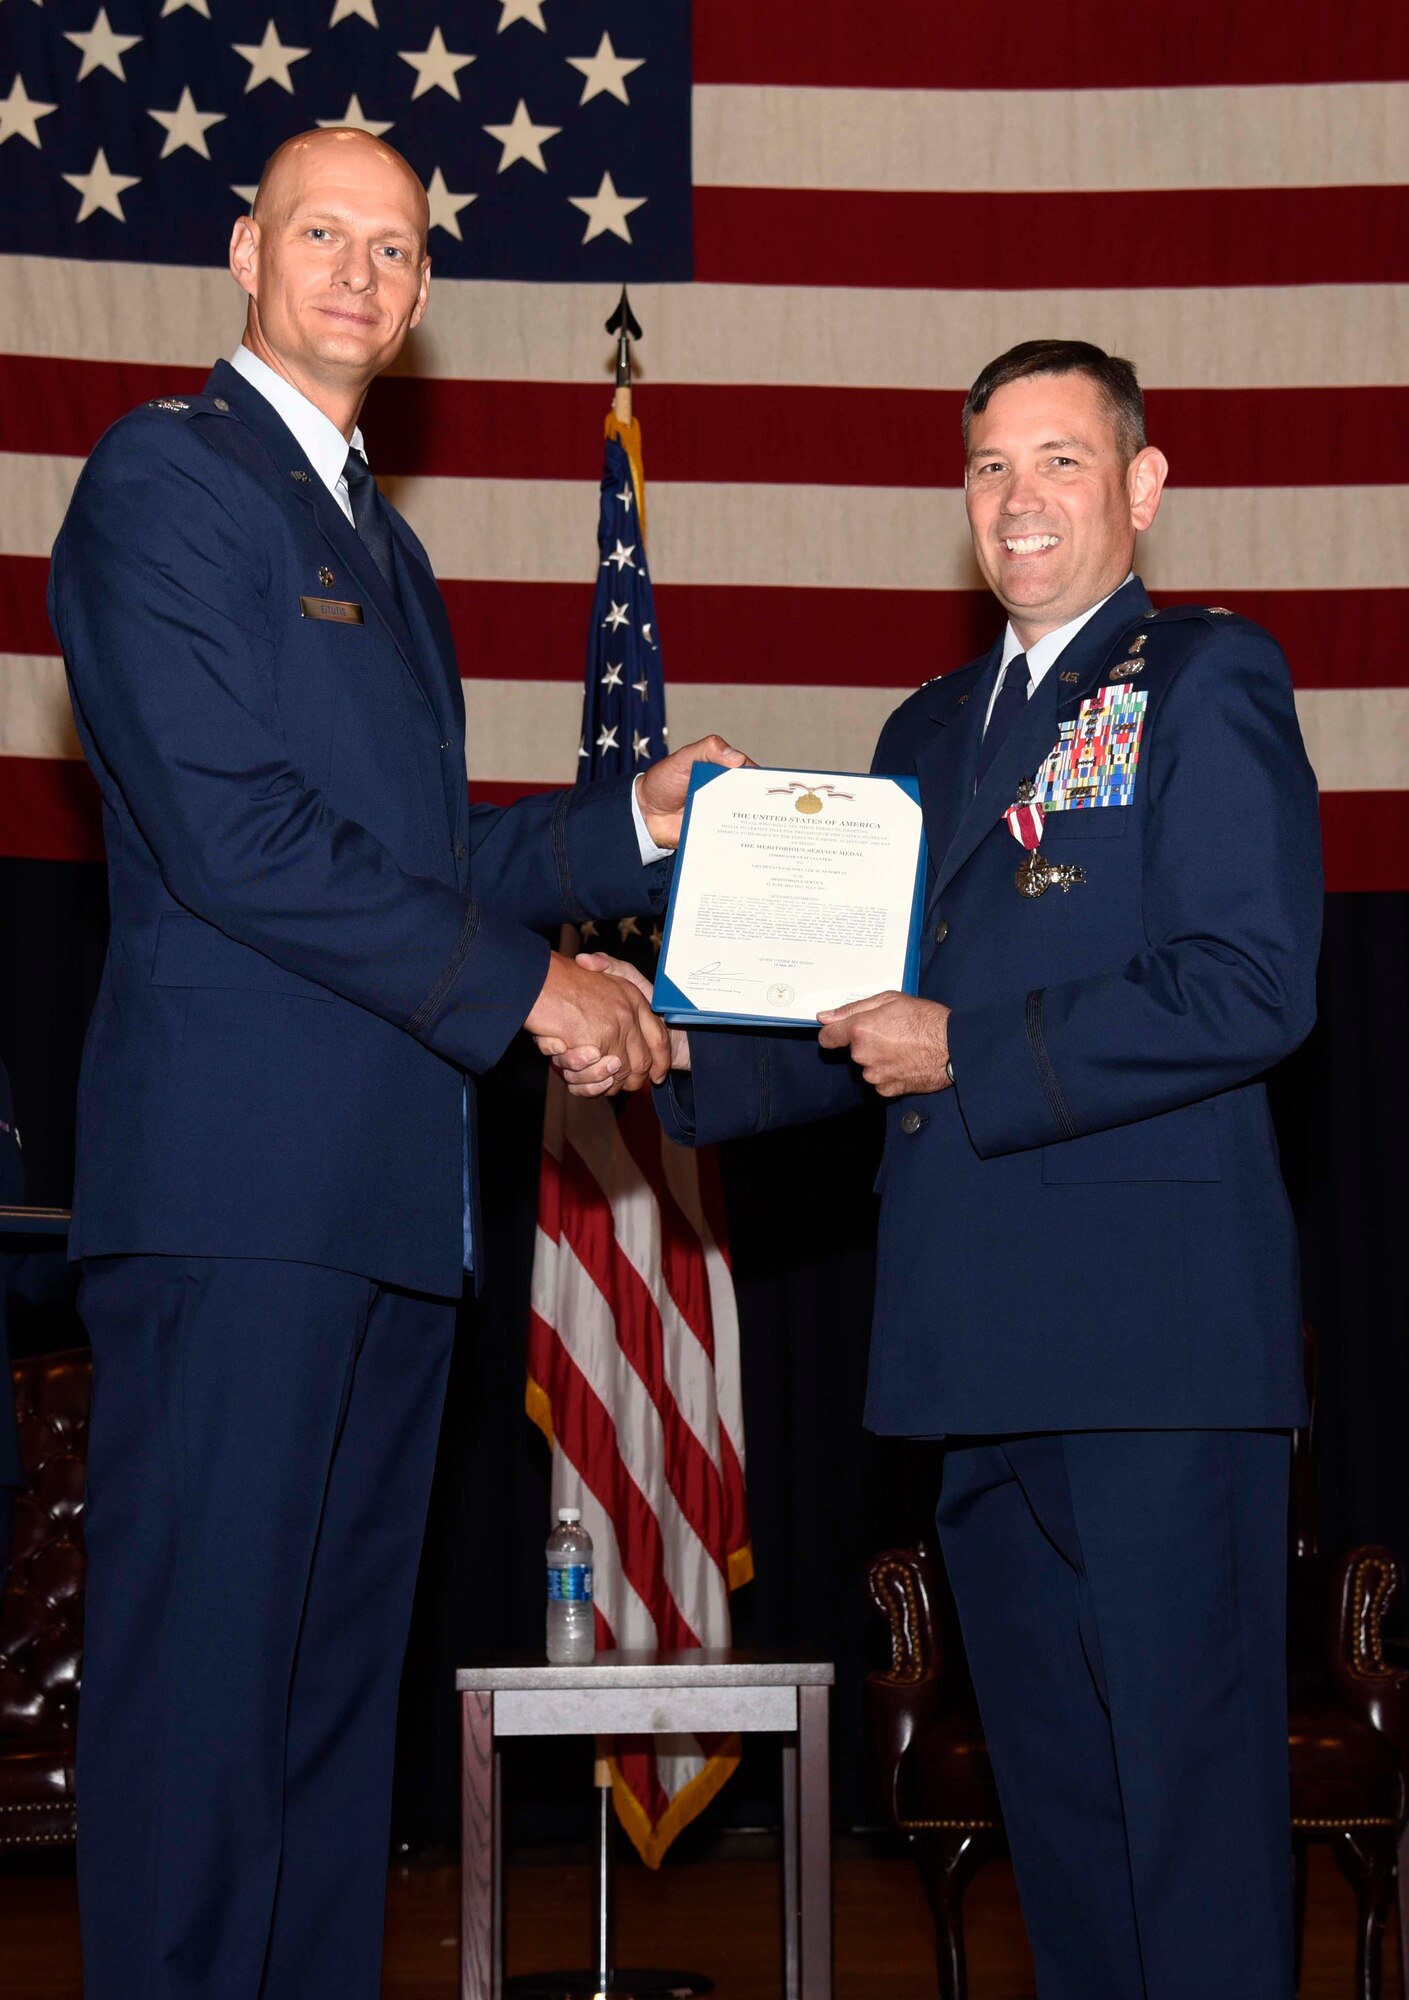 A change of command ceremony